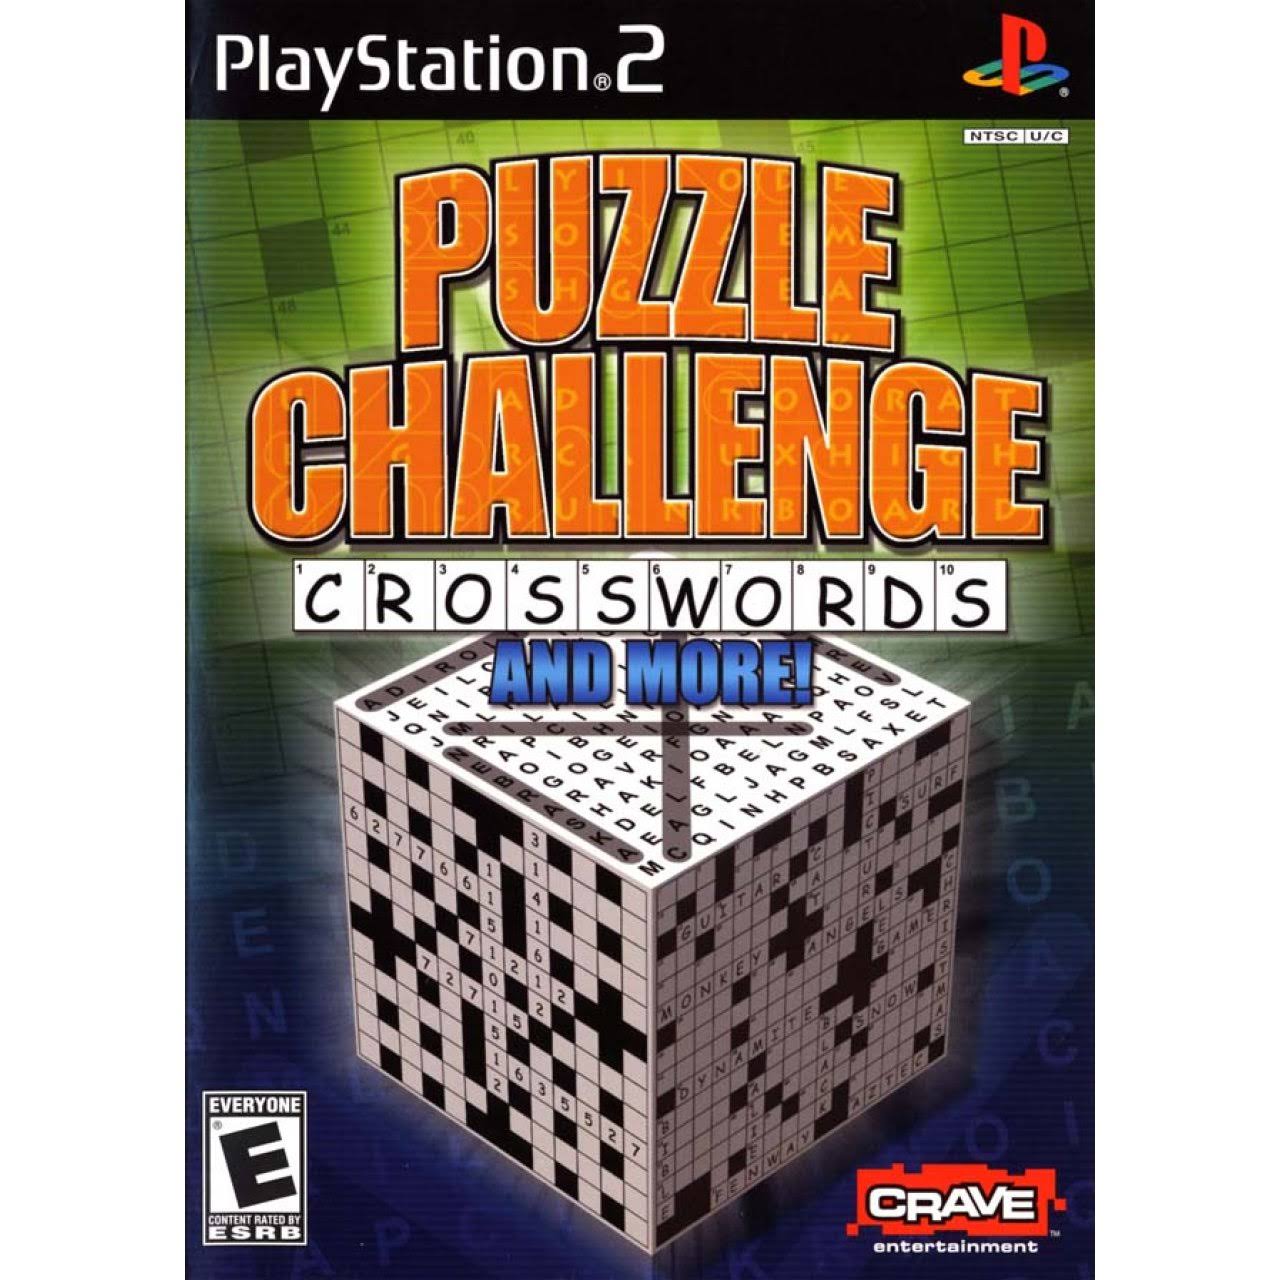 Puzzle Challenge: Crosswords and More - PlayStation 2